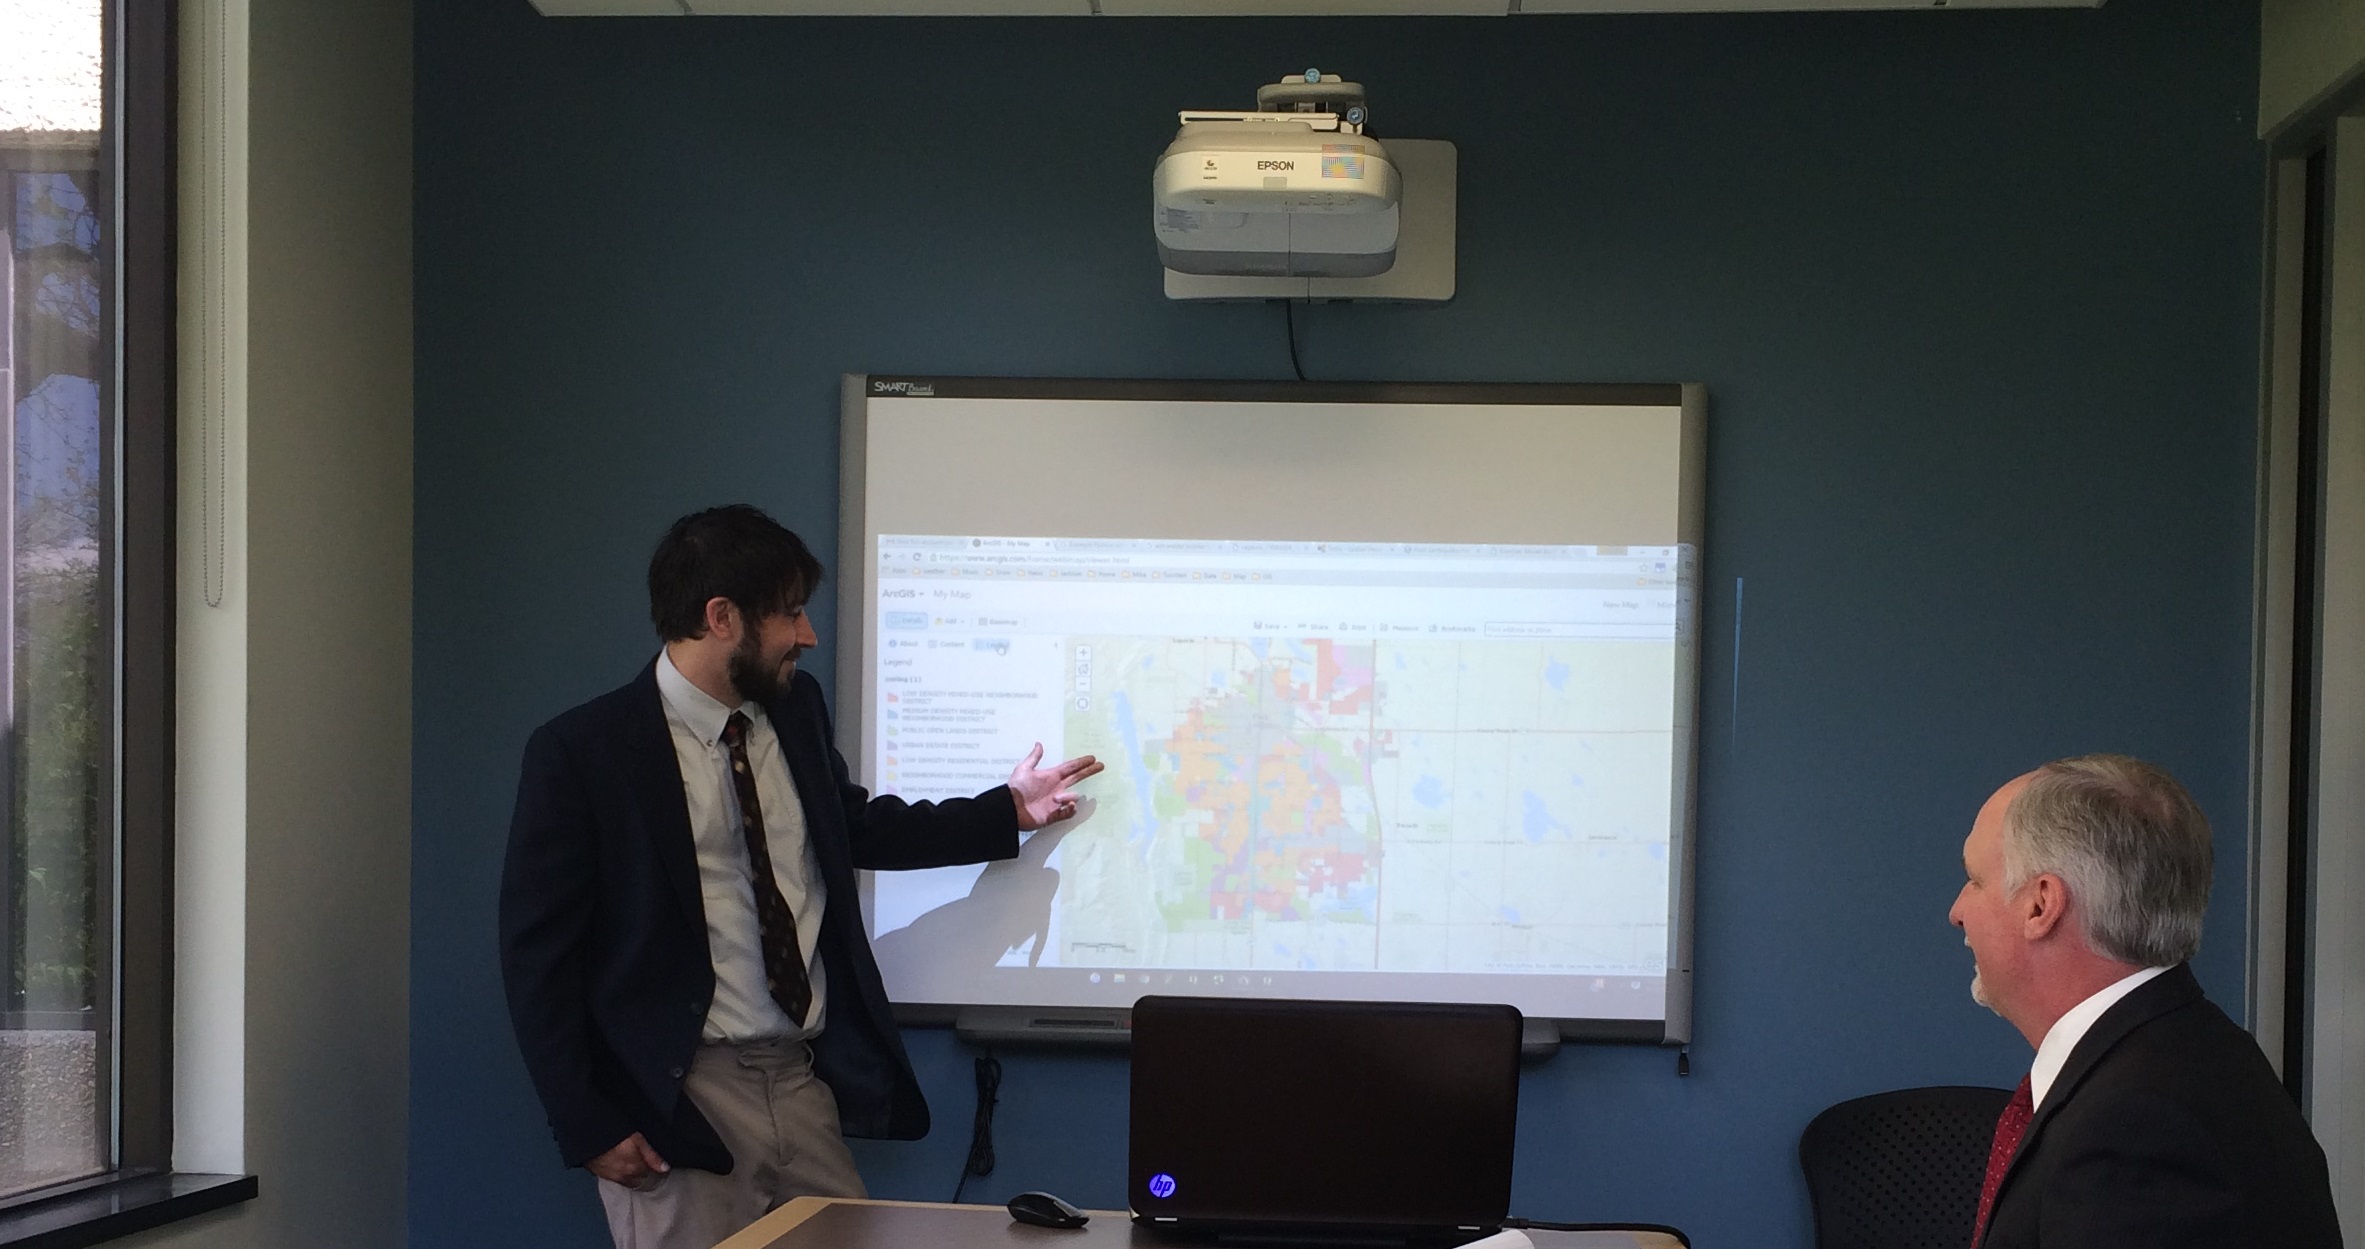 This photograph depicts Drew Derderian presenting a map assessment